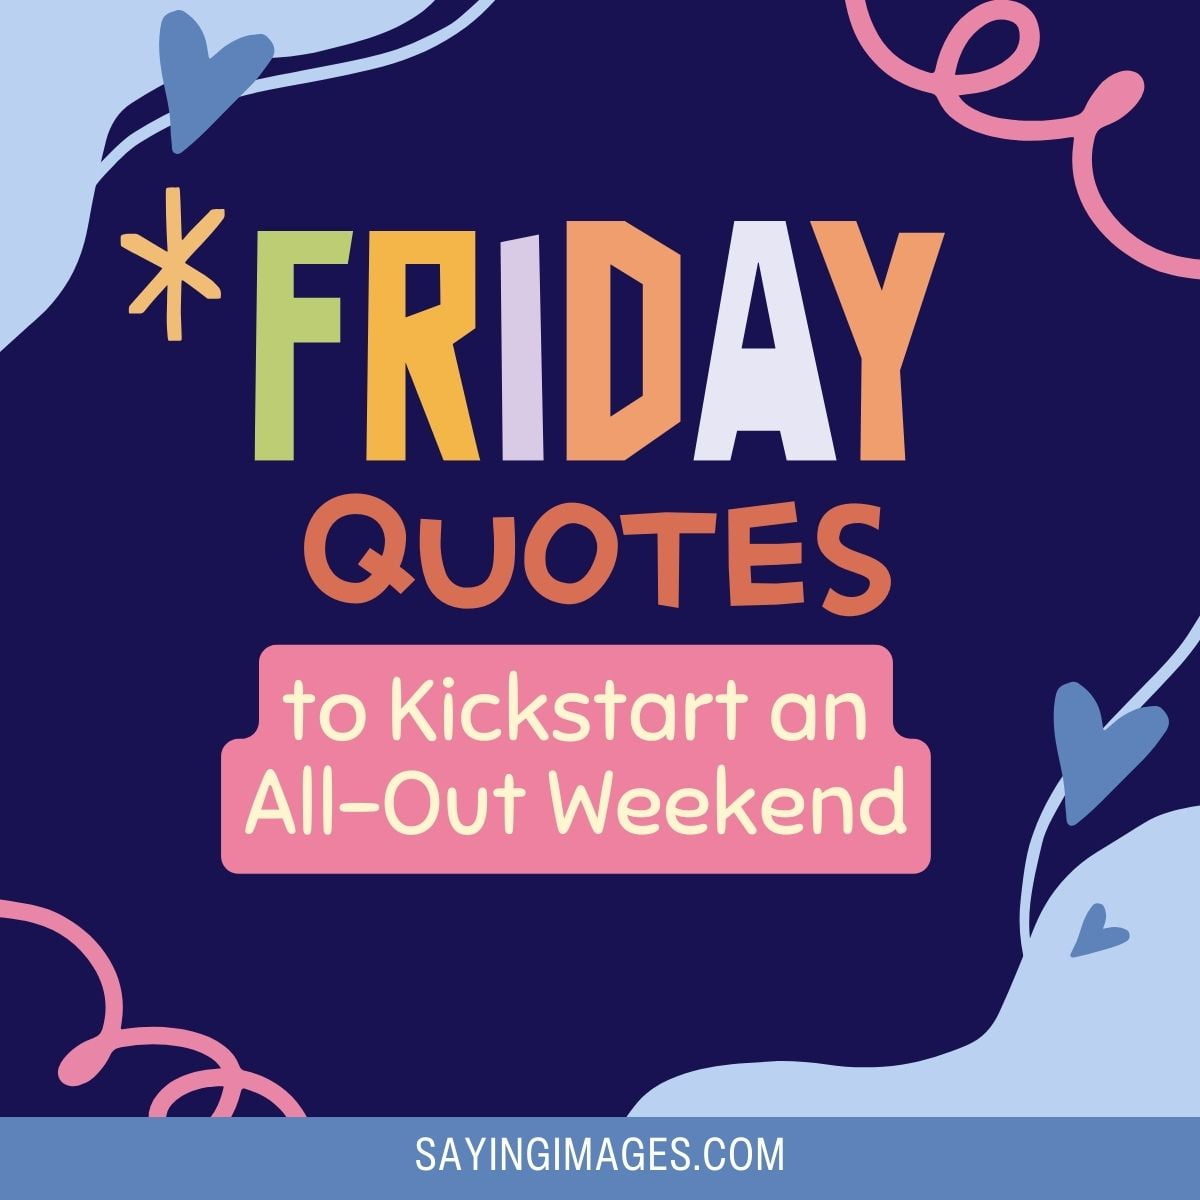 40 Friday Quotes to Kickstart an All-Out Weekend